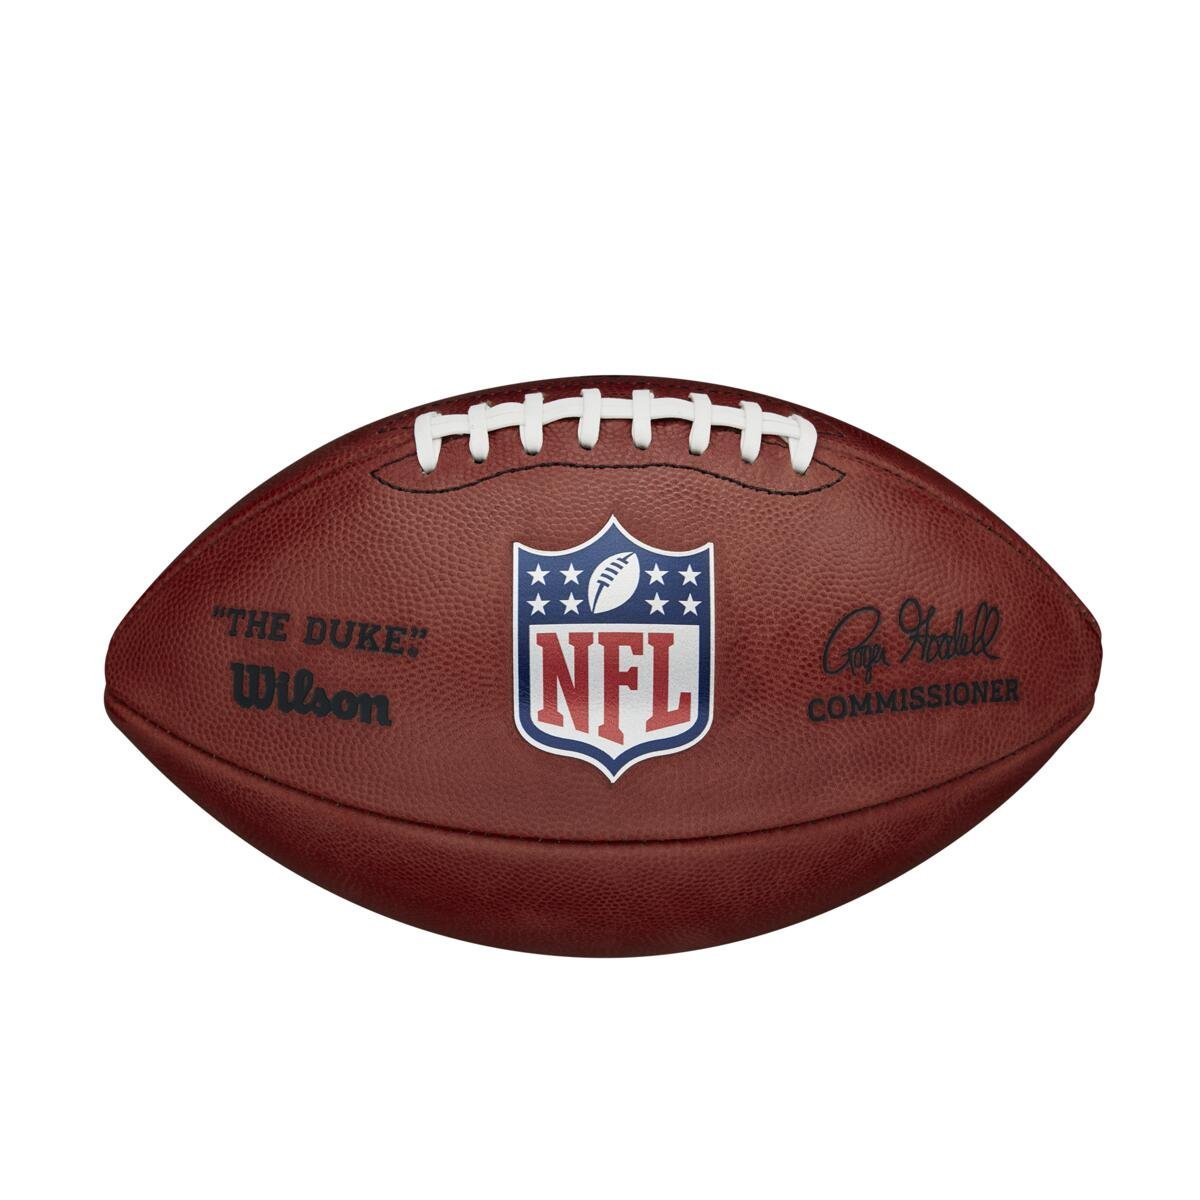 F1100BRS0_0_OF_NFL_DUKE_GAME_BALL_Official_BR.png.cq5dam.web.1200.1200